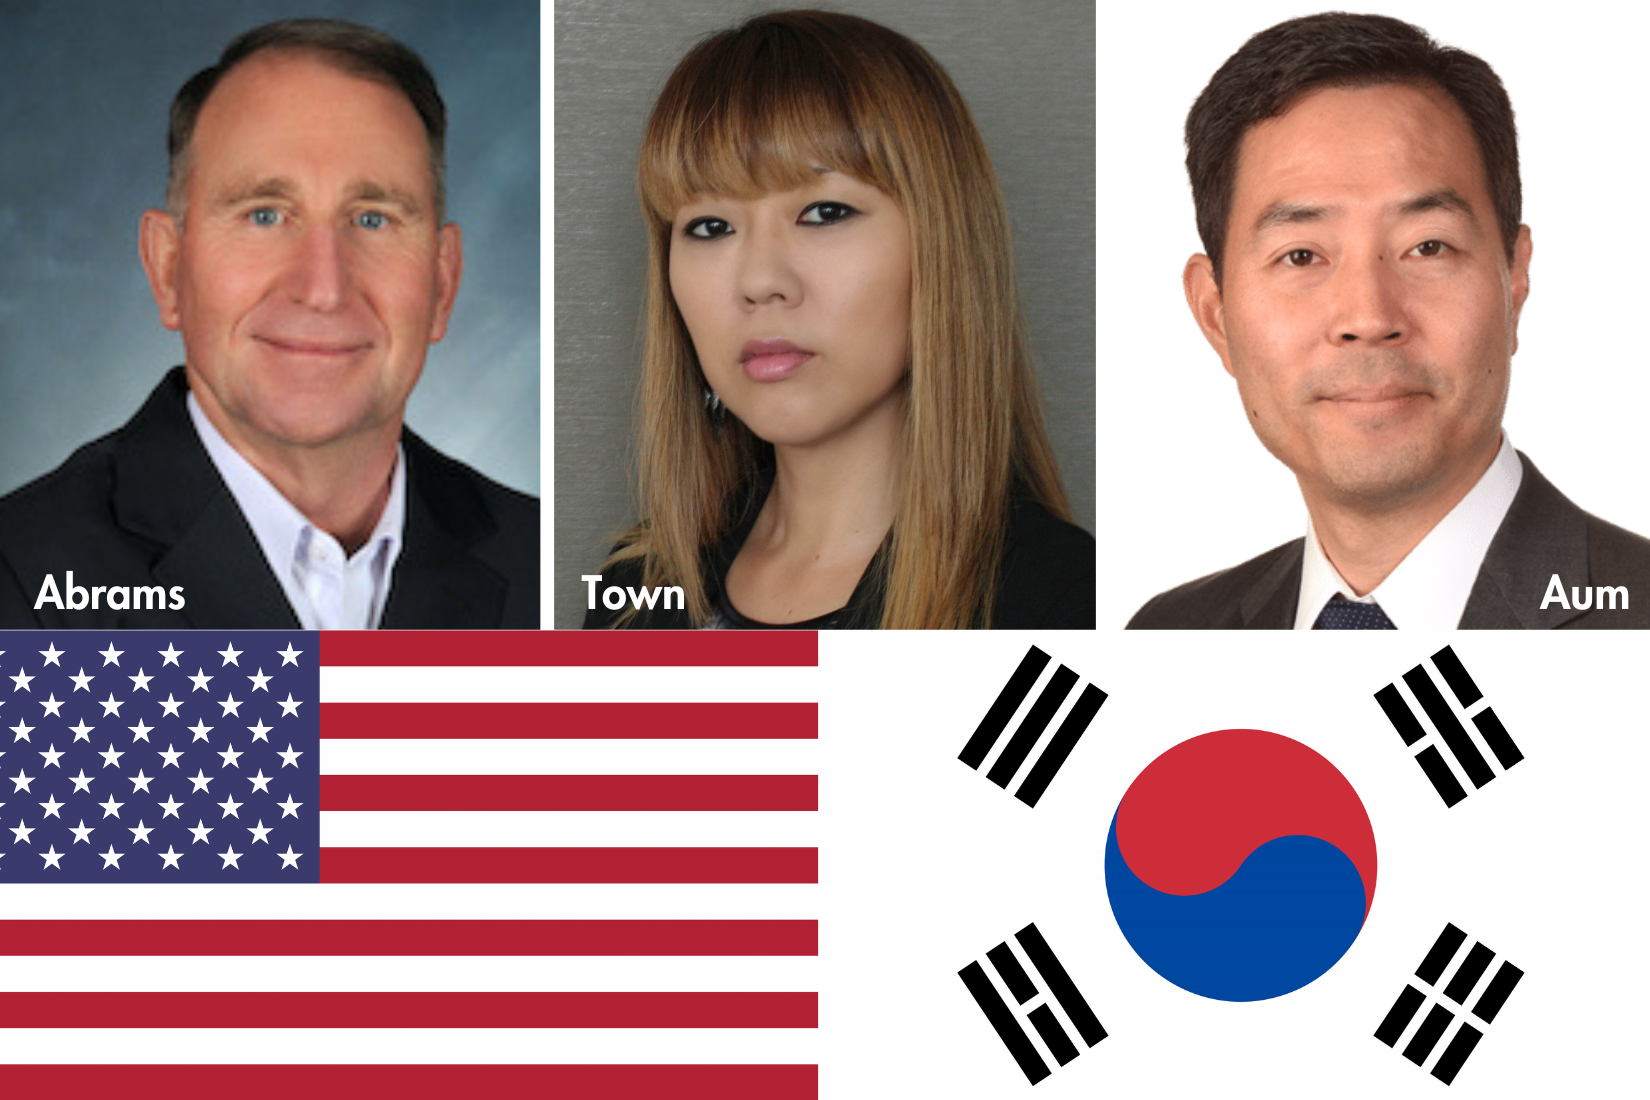 Graphic with headshots of Abrams, Town and Aum, along with the U.S. and Republic of Korean flagsepublic of 